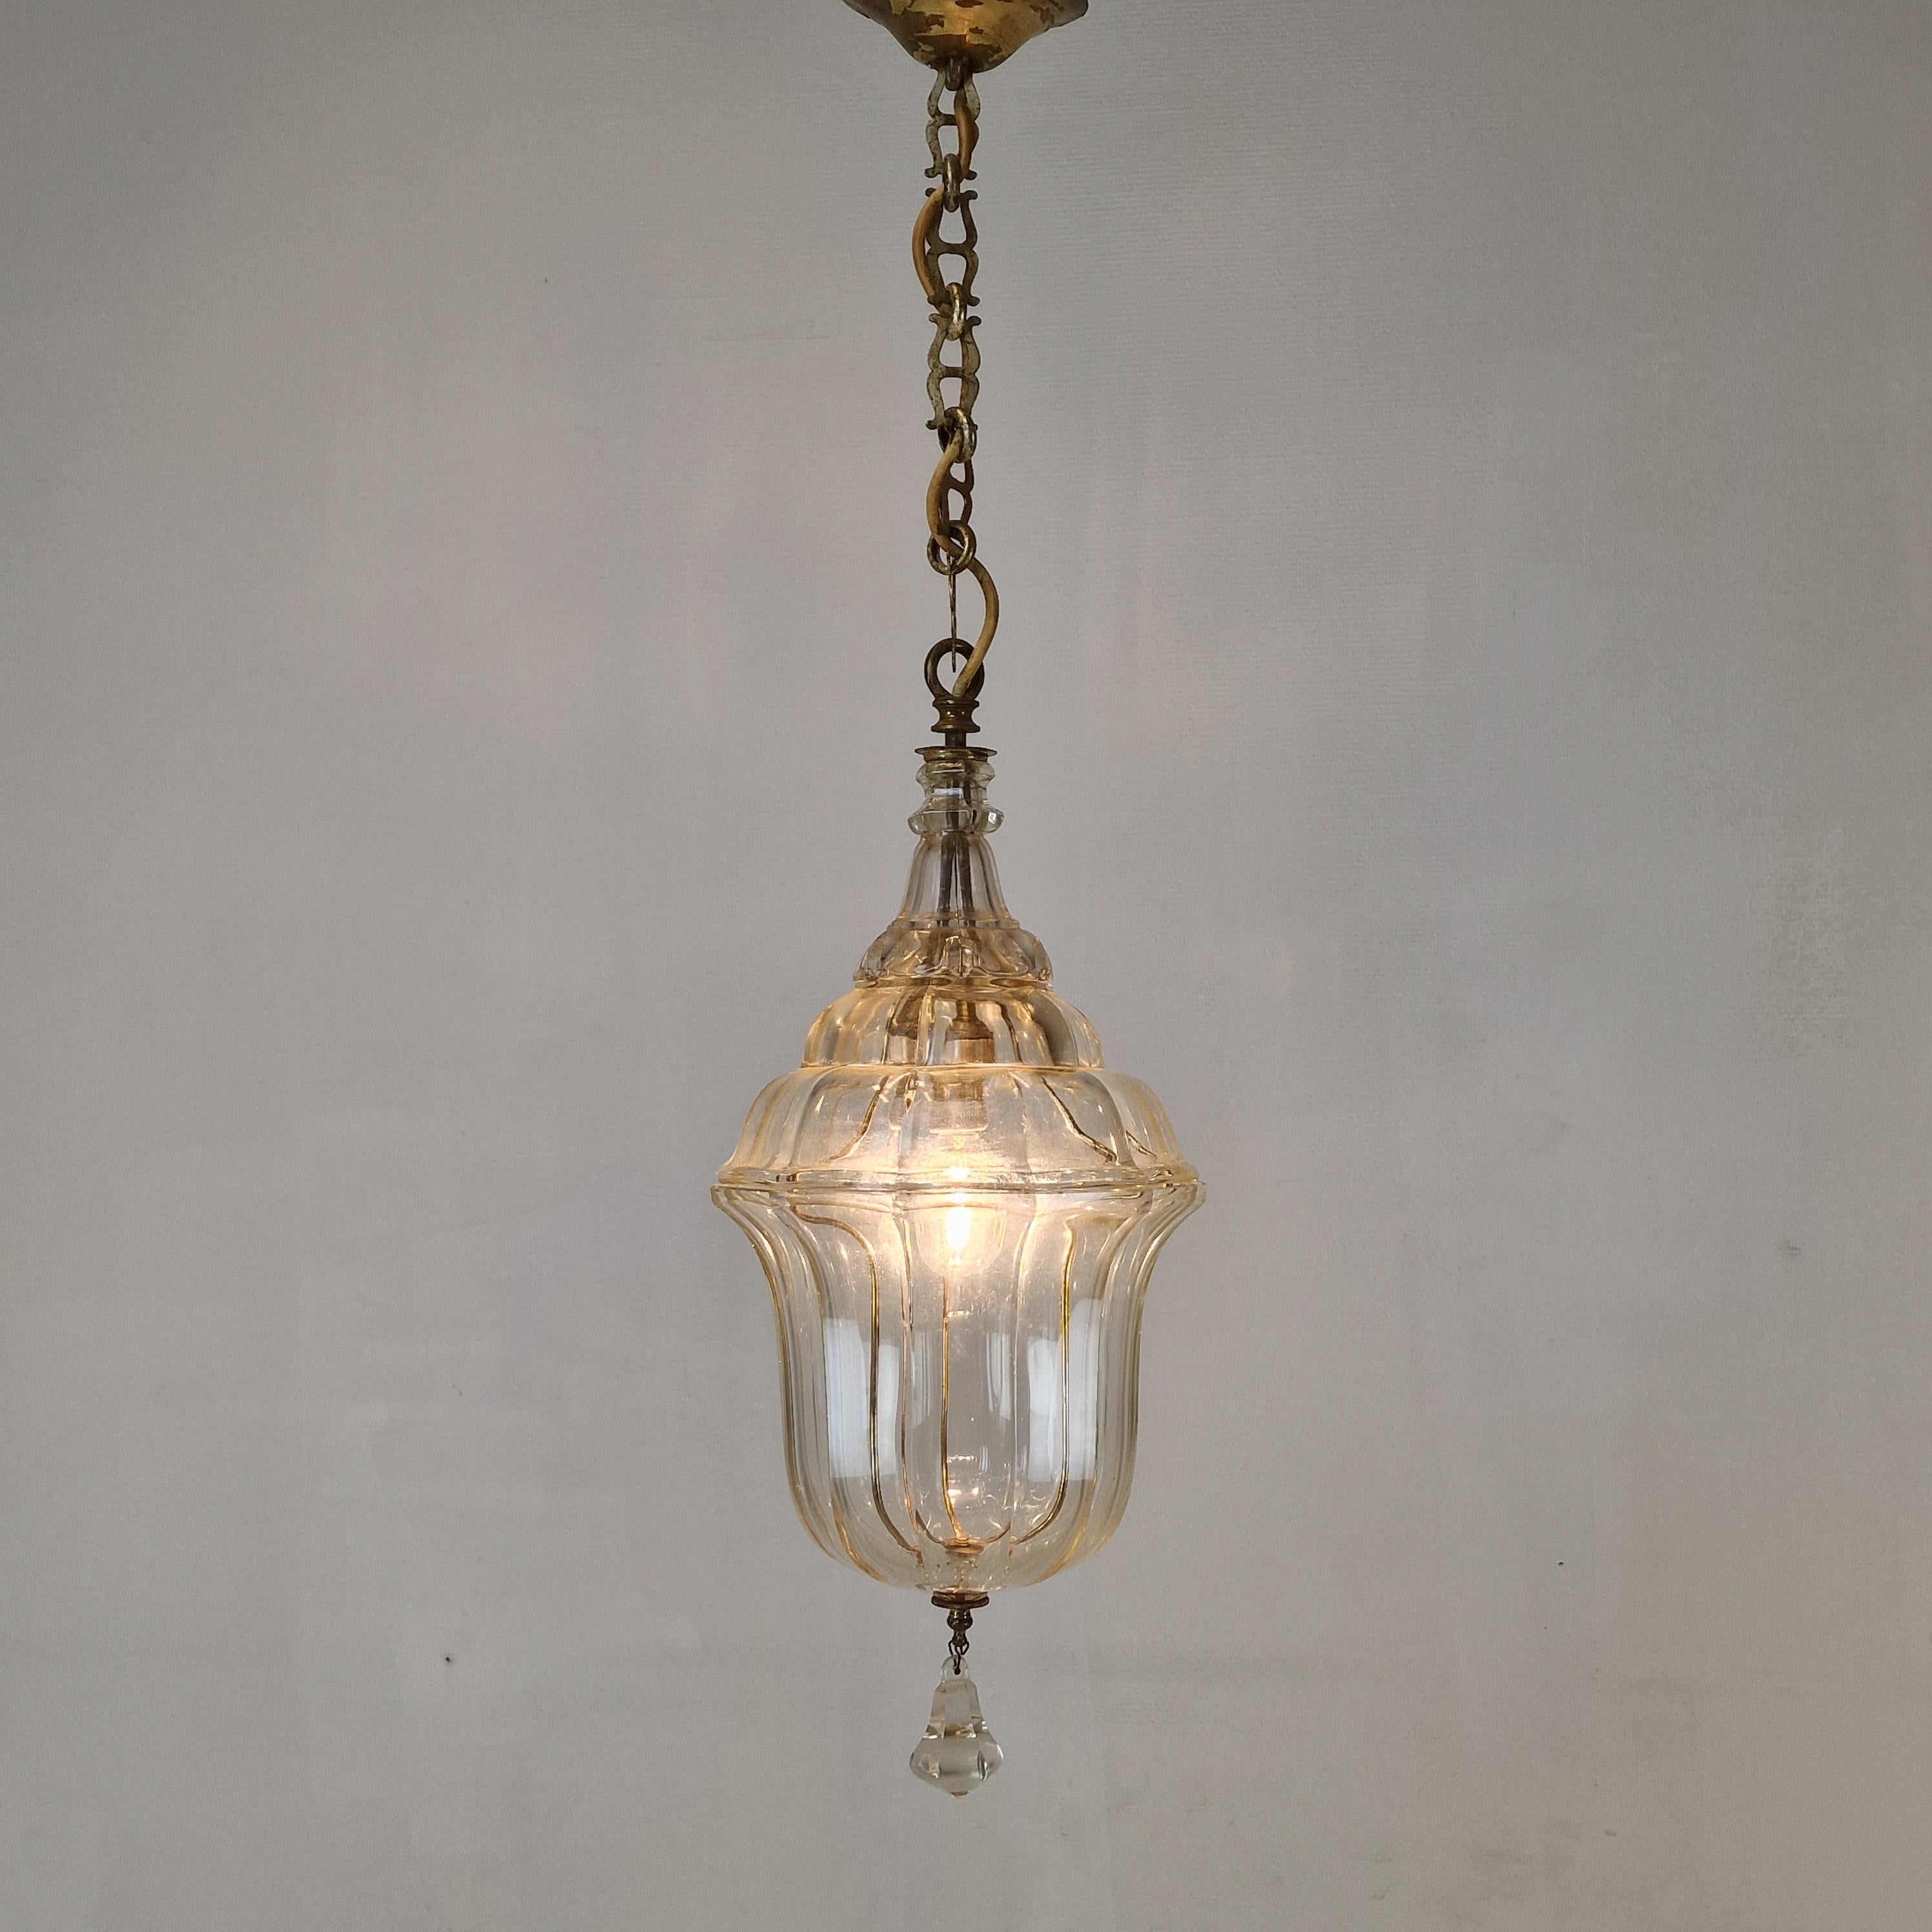 Very charming lantern made around 1900 in Italy. 

It is made of beautiful cut crystal glass with brass details.

The lamp is in very good condition, regarding the age, just the normal using spots (see the pictures).

The wiring has been checked by